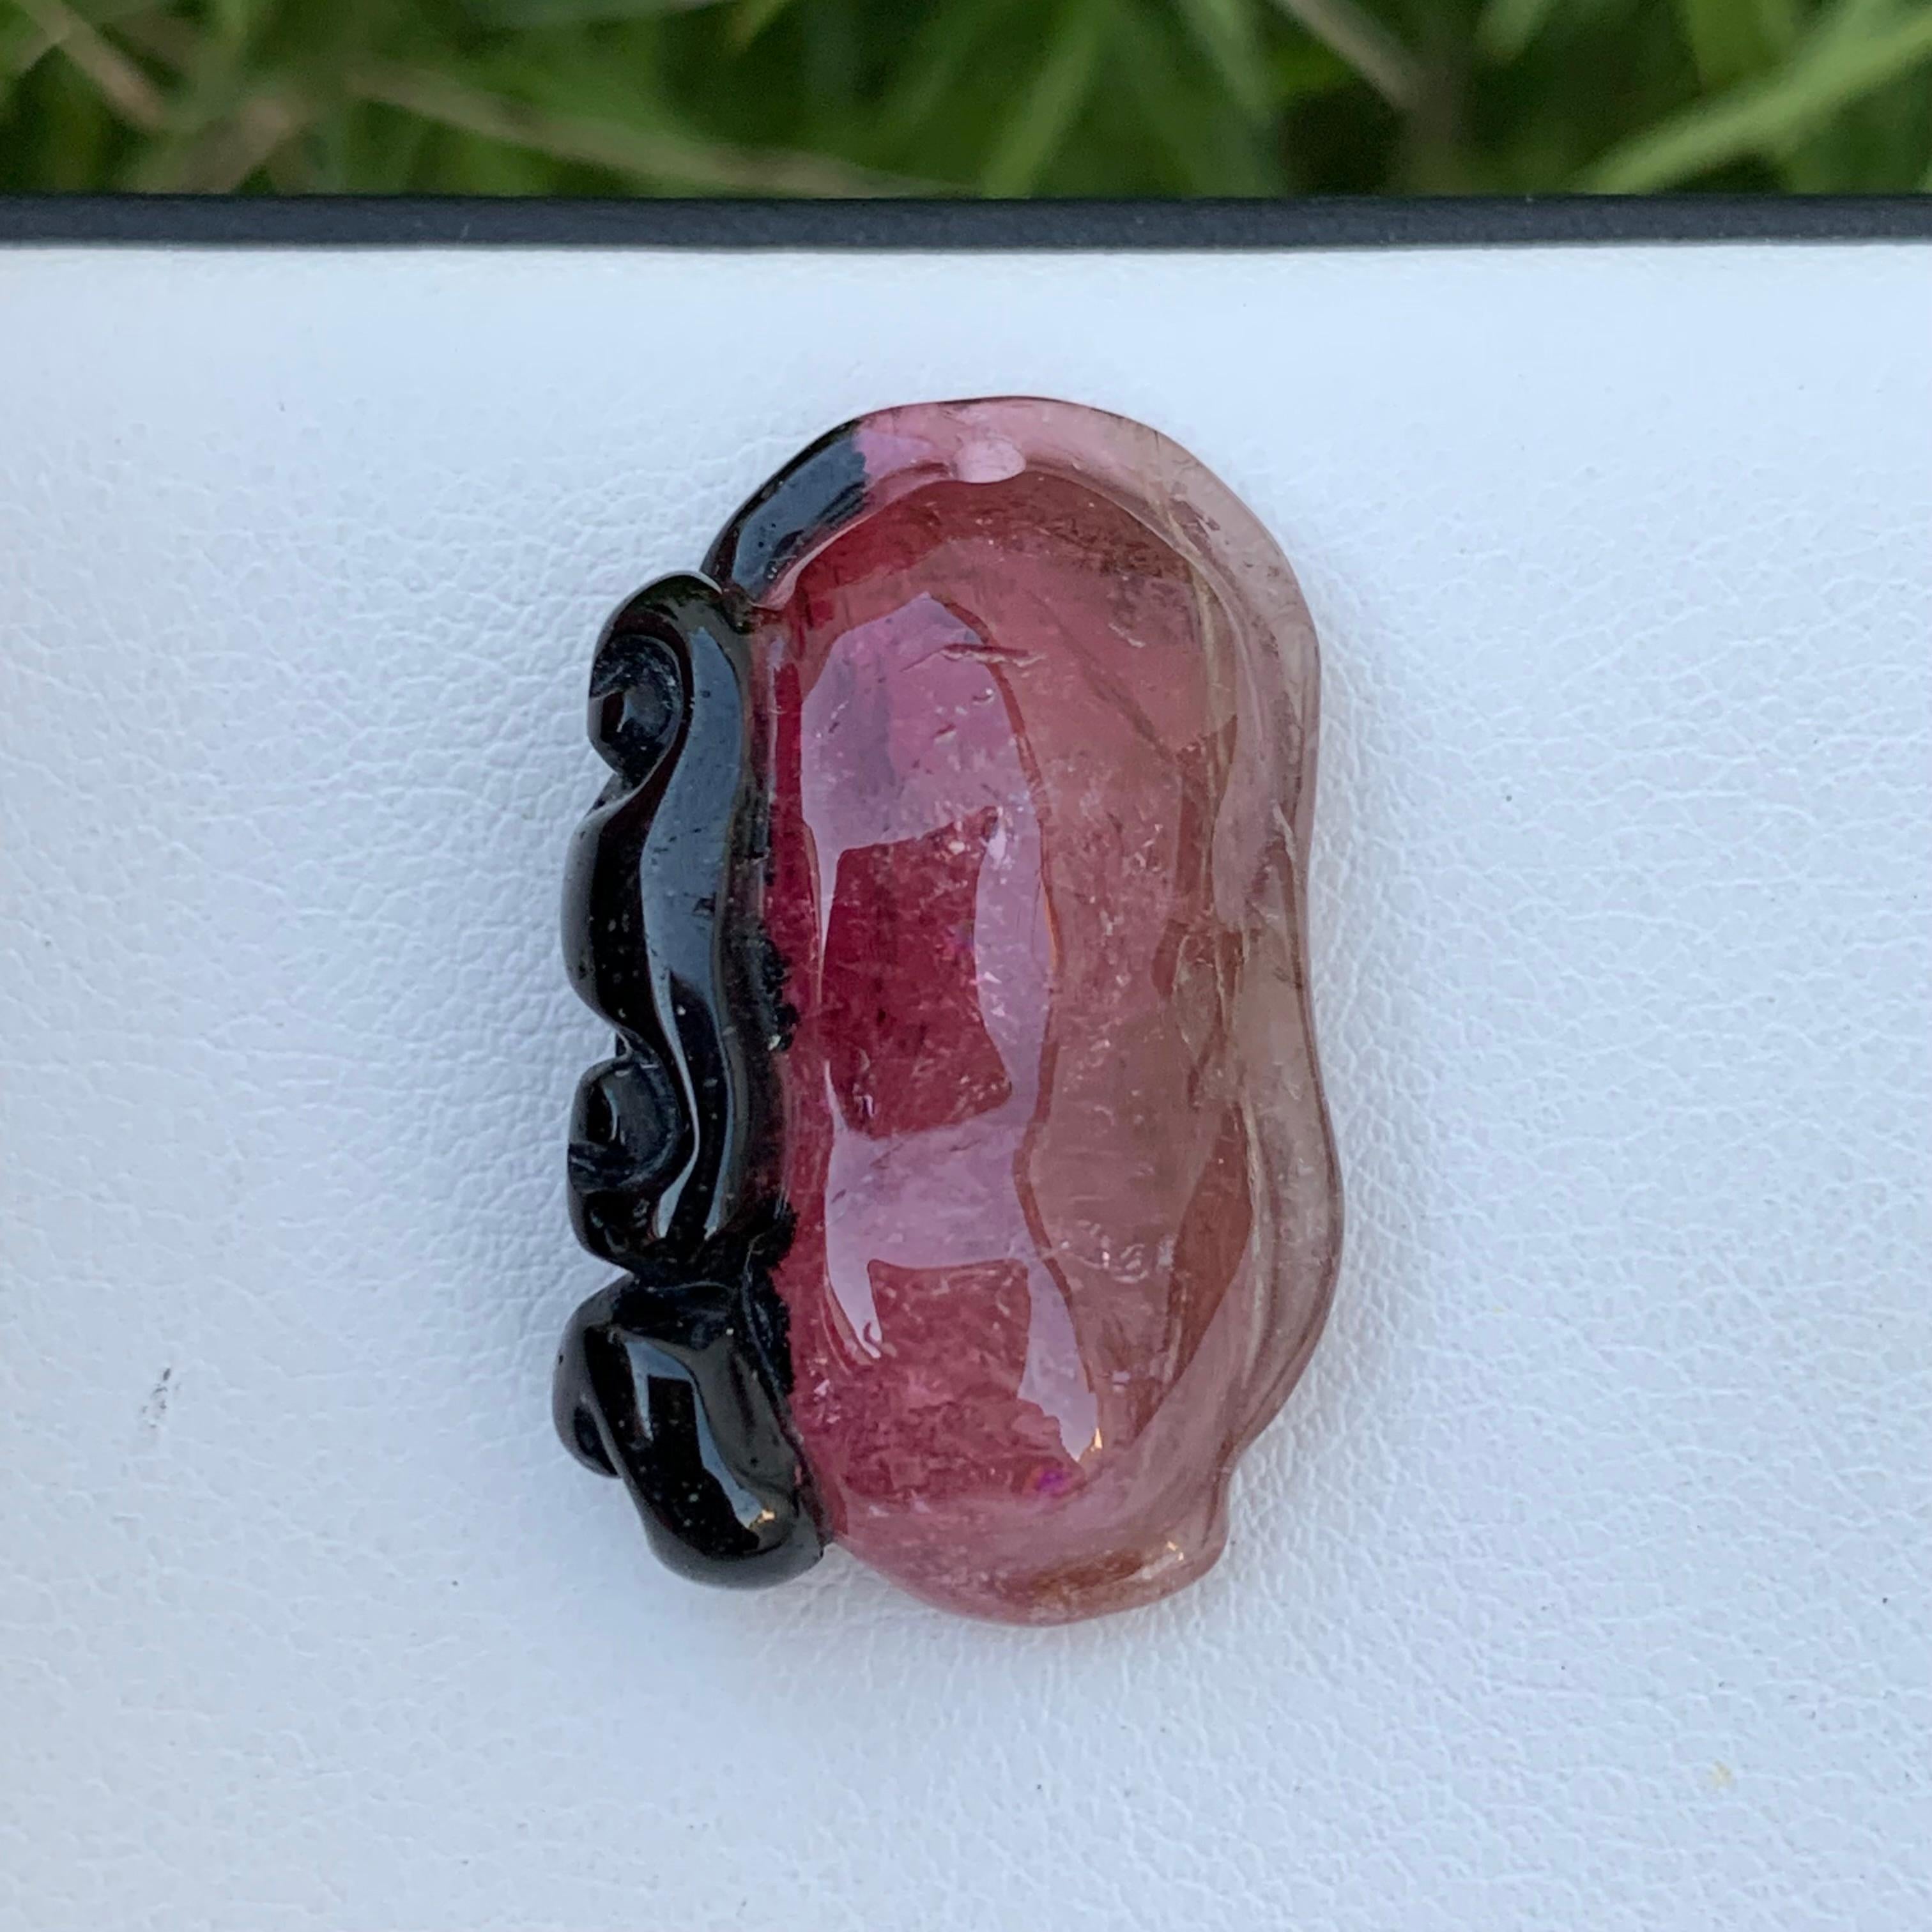 Weight: 26.70 Carats
Dimension: 2.6 x 1.7 x 0.7 Cm
Origin: Africa
Color: Red Pink and Green
Shape: Carving
Quality: AAA
Tourmaline helps to create a shield around a person or room to prevent negative or unwelcome energies from entering. It is also